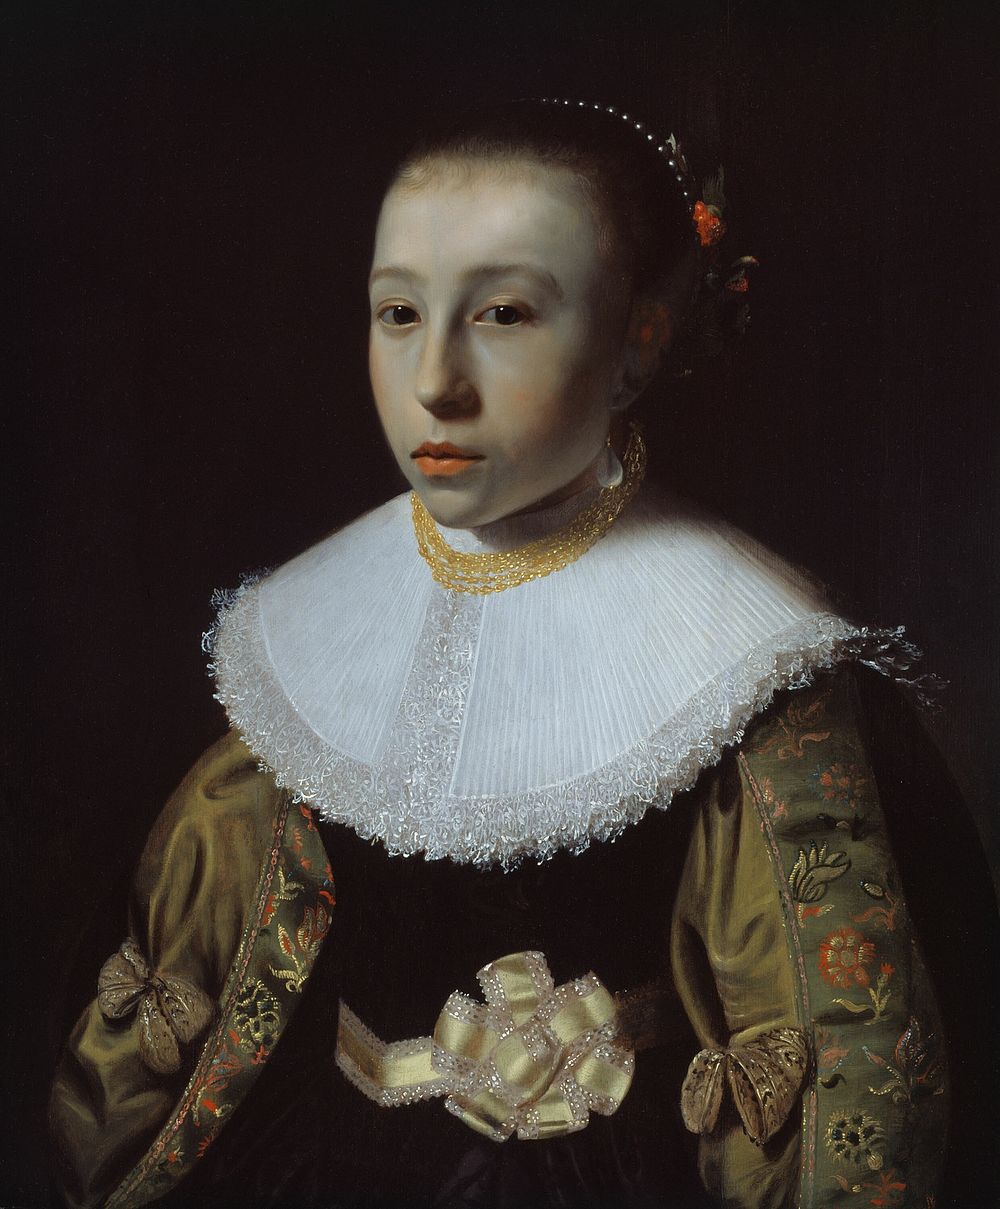 Portrait of a Young Girl by Pieter Dubordieu